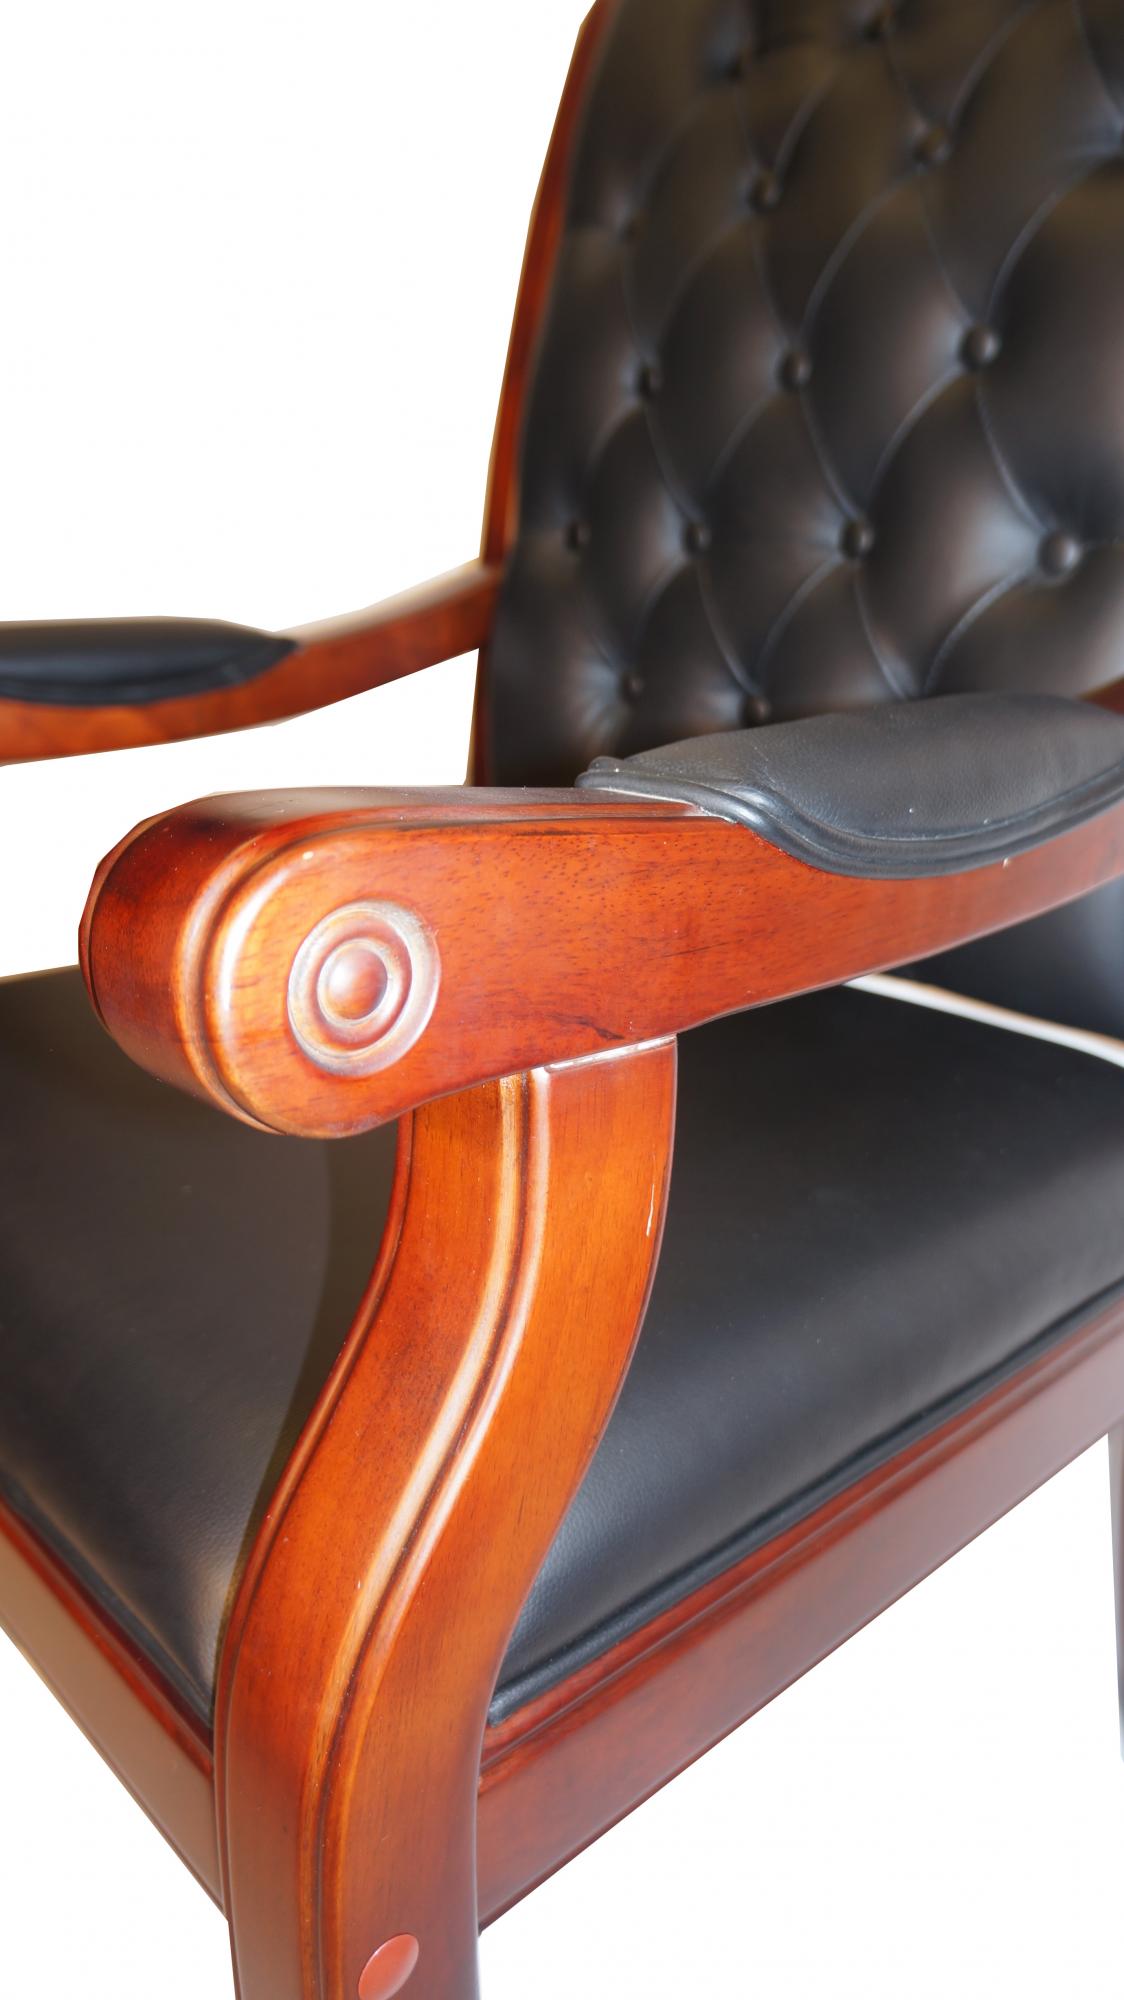 Chesterfield Black Genuine Leather Visitor Chair with Walnut Arms - GRA-F55C-1